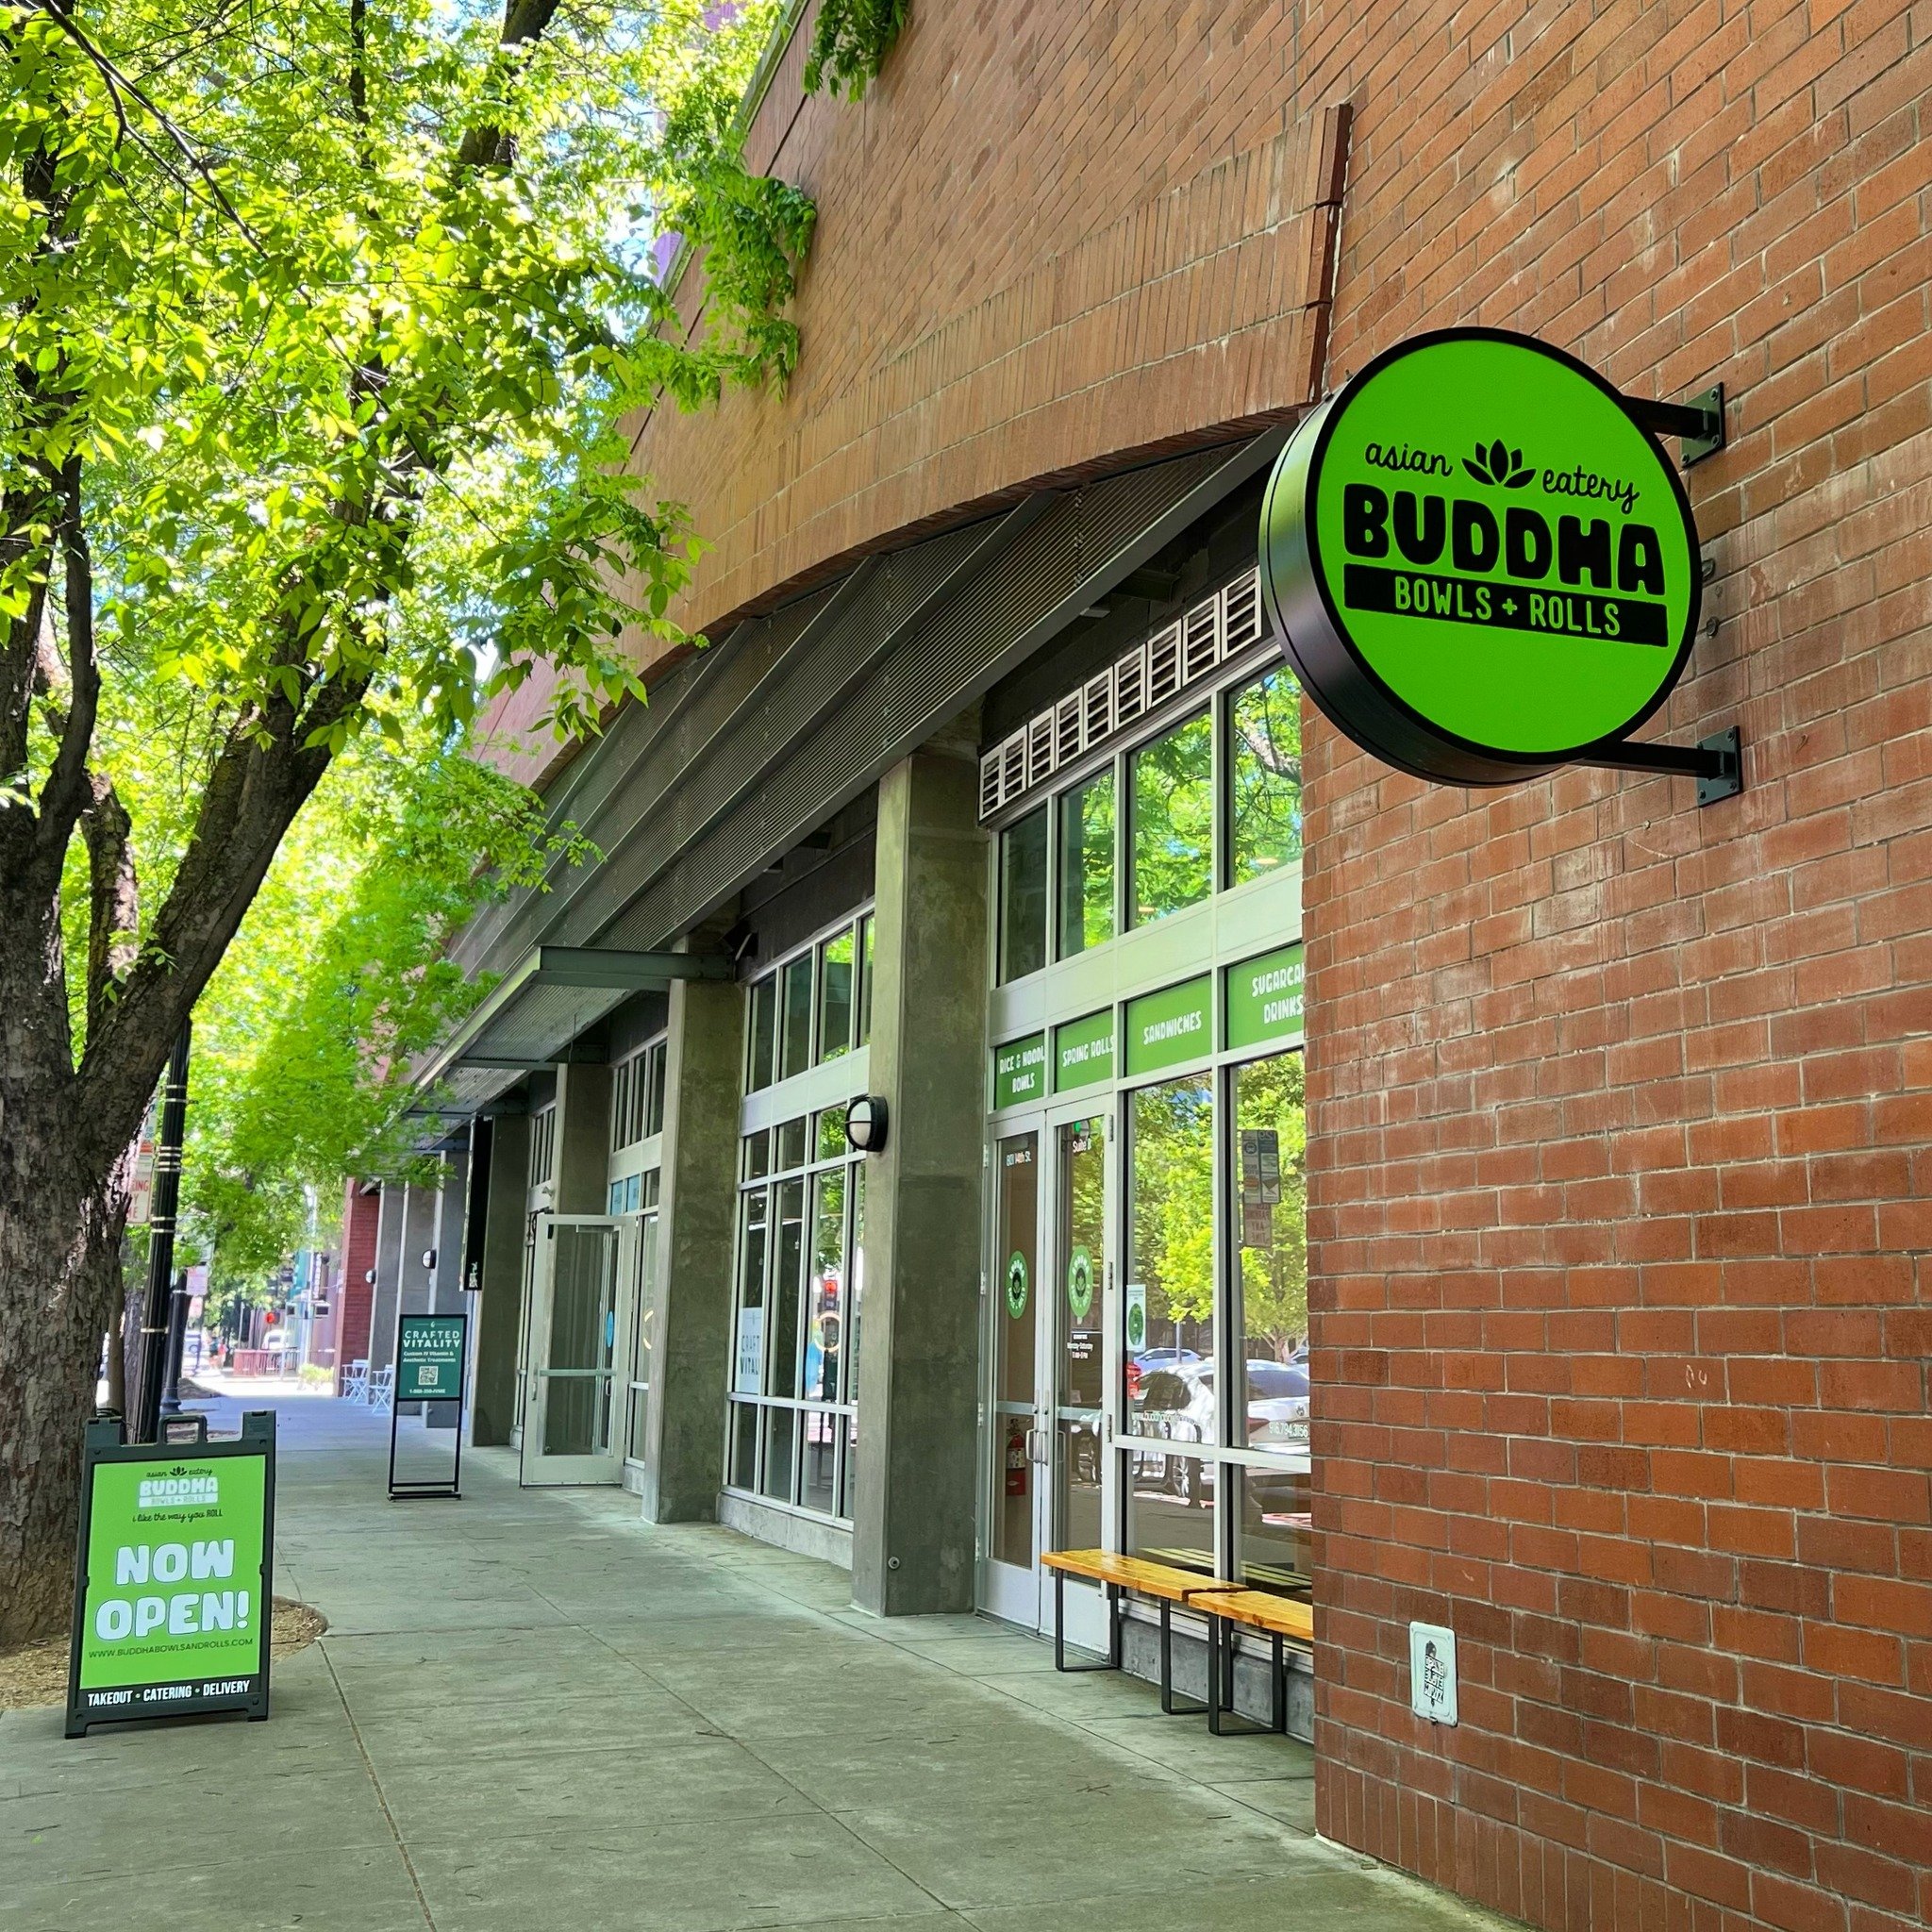 If you&rsquo;re new to Buddha Bowls and Rolls, we&rsquo;re located on H and 14th on the H Street side. Just look for the neon green sign!

#buddhabowlsandrolls #ilikethewayyouroll #takeoutrestaurant #visitsacramento #downtownsacramento #downtownsac #